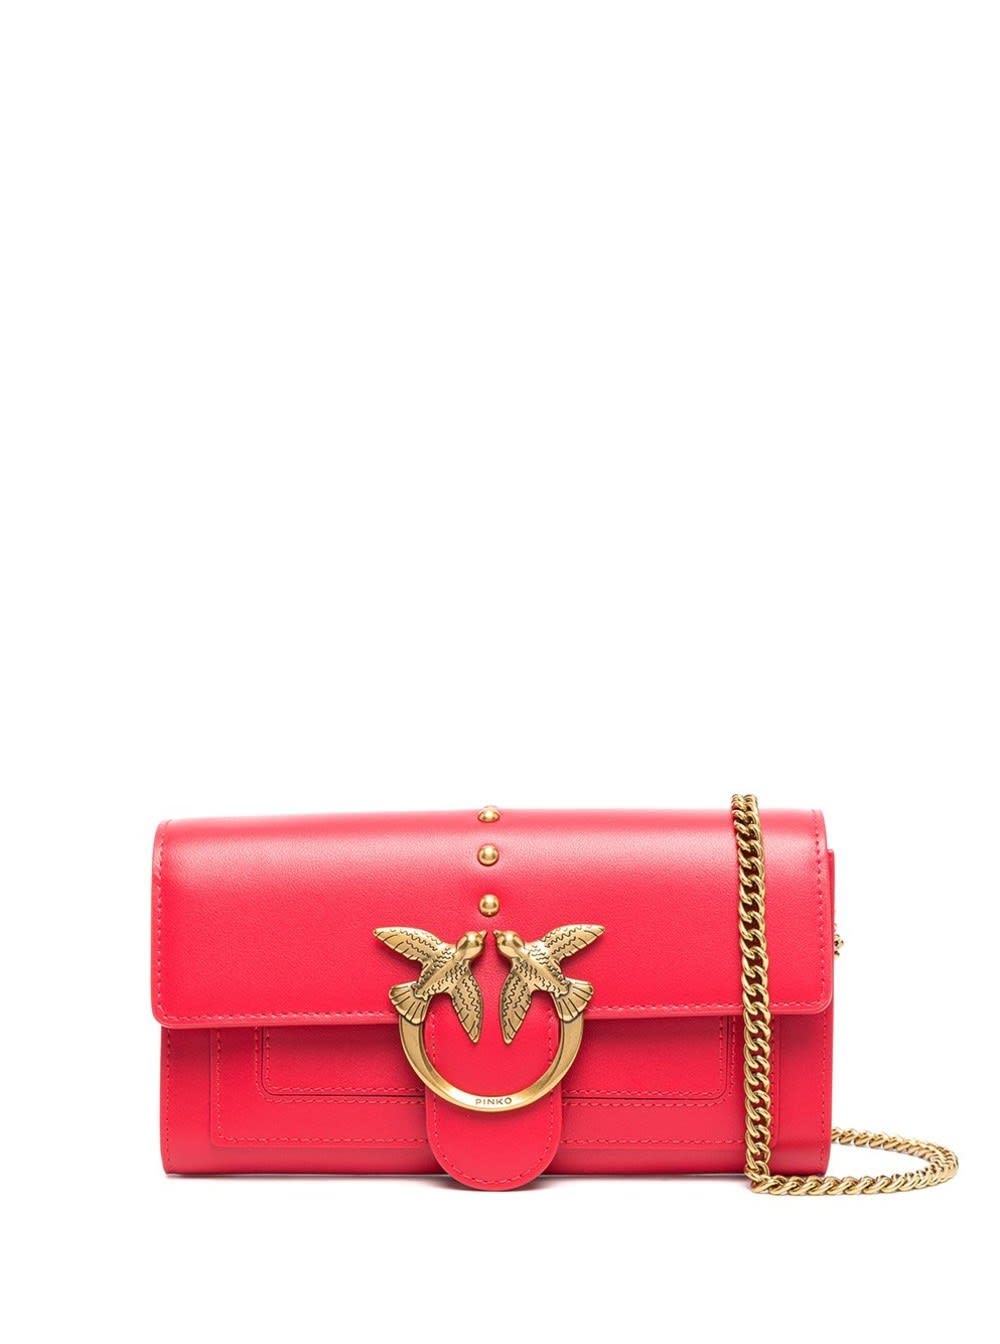 Pinko Love Crossbody Bag In Red Leather